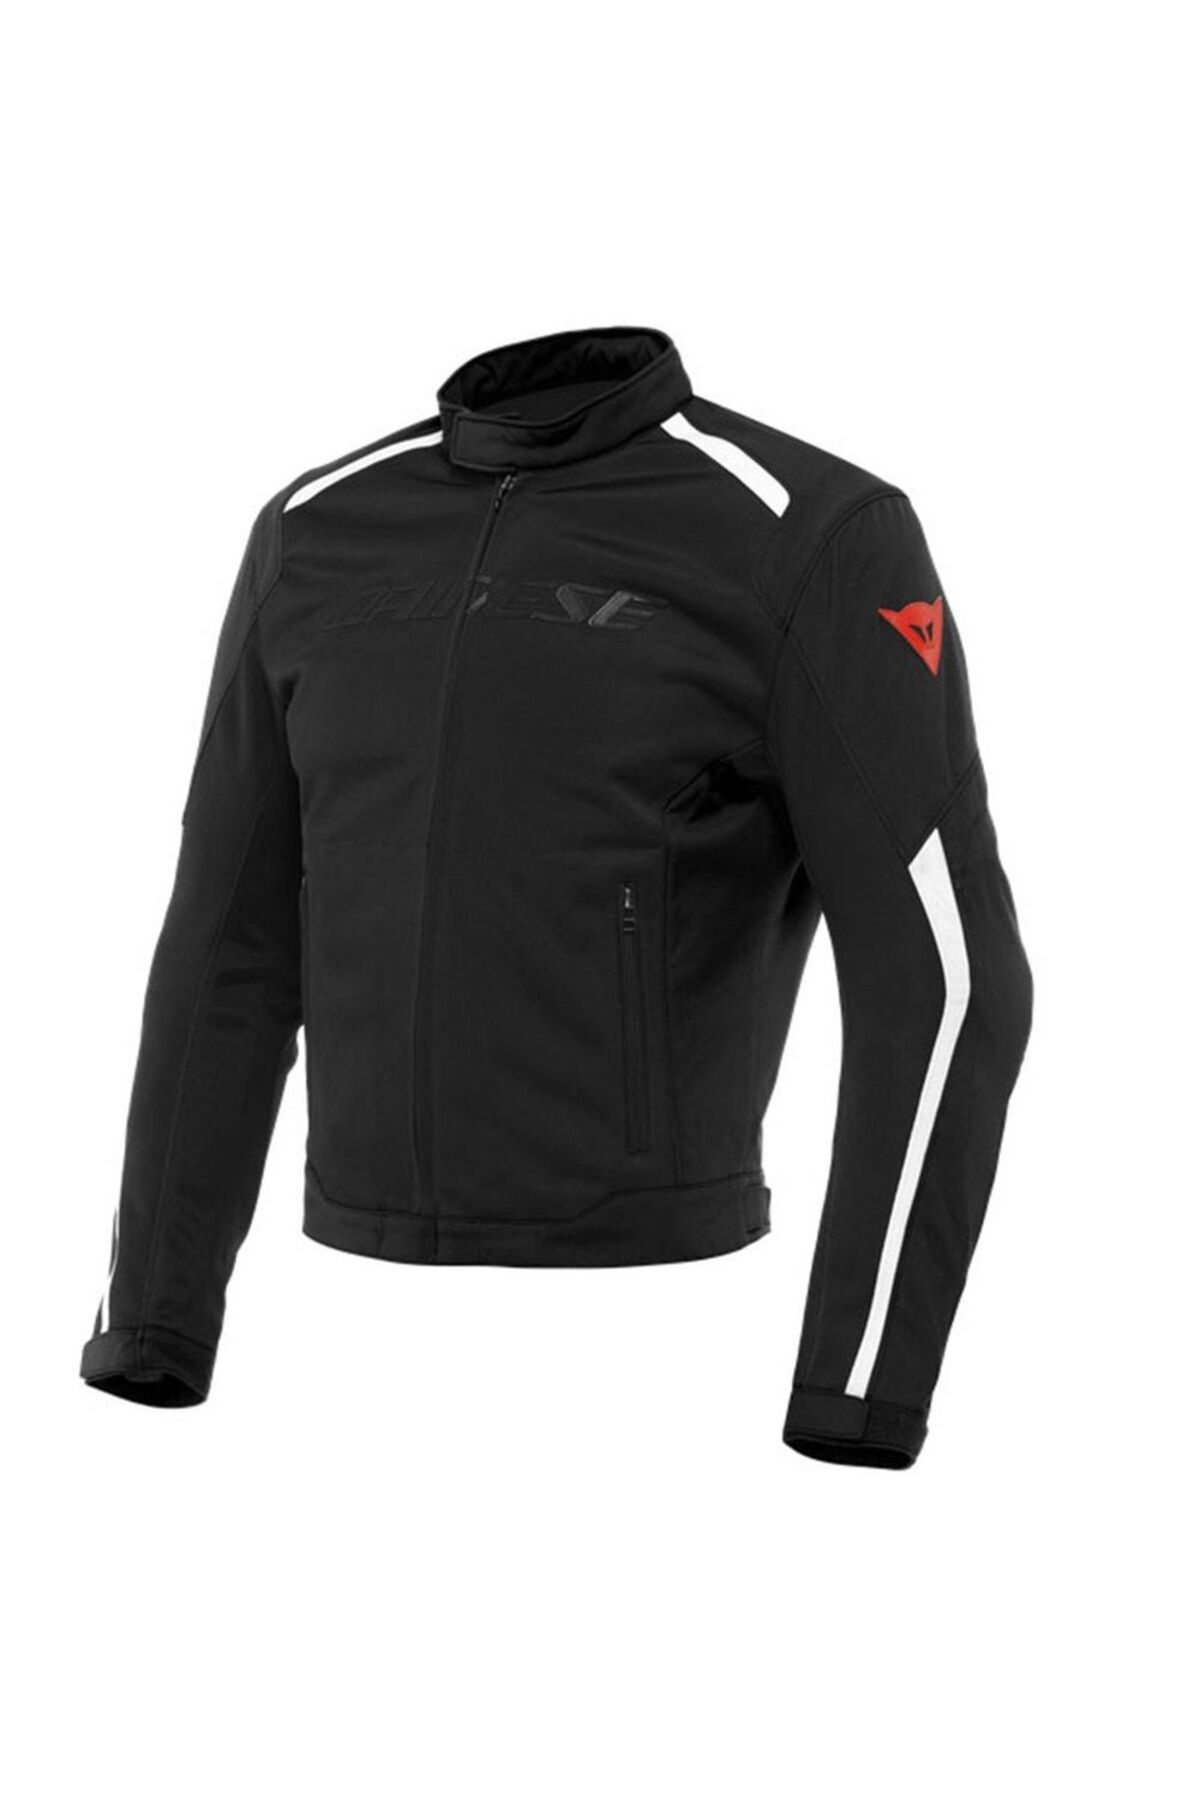 Dainese Hydra Flux 2 Air Black Red D-dry Mont